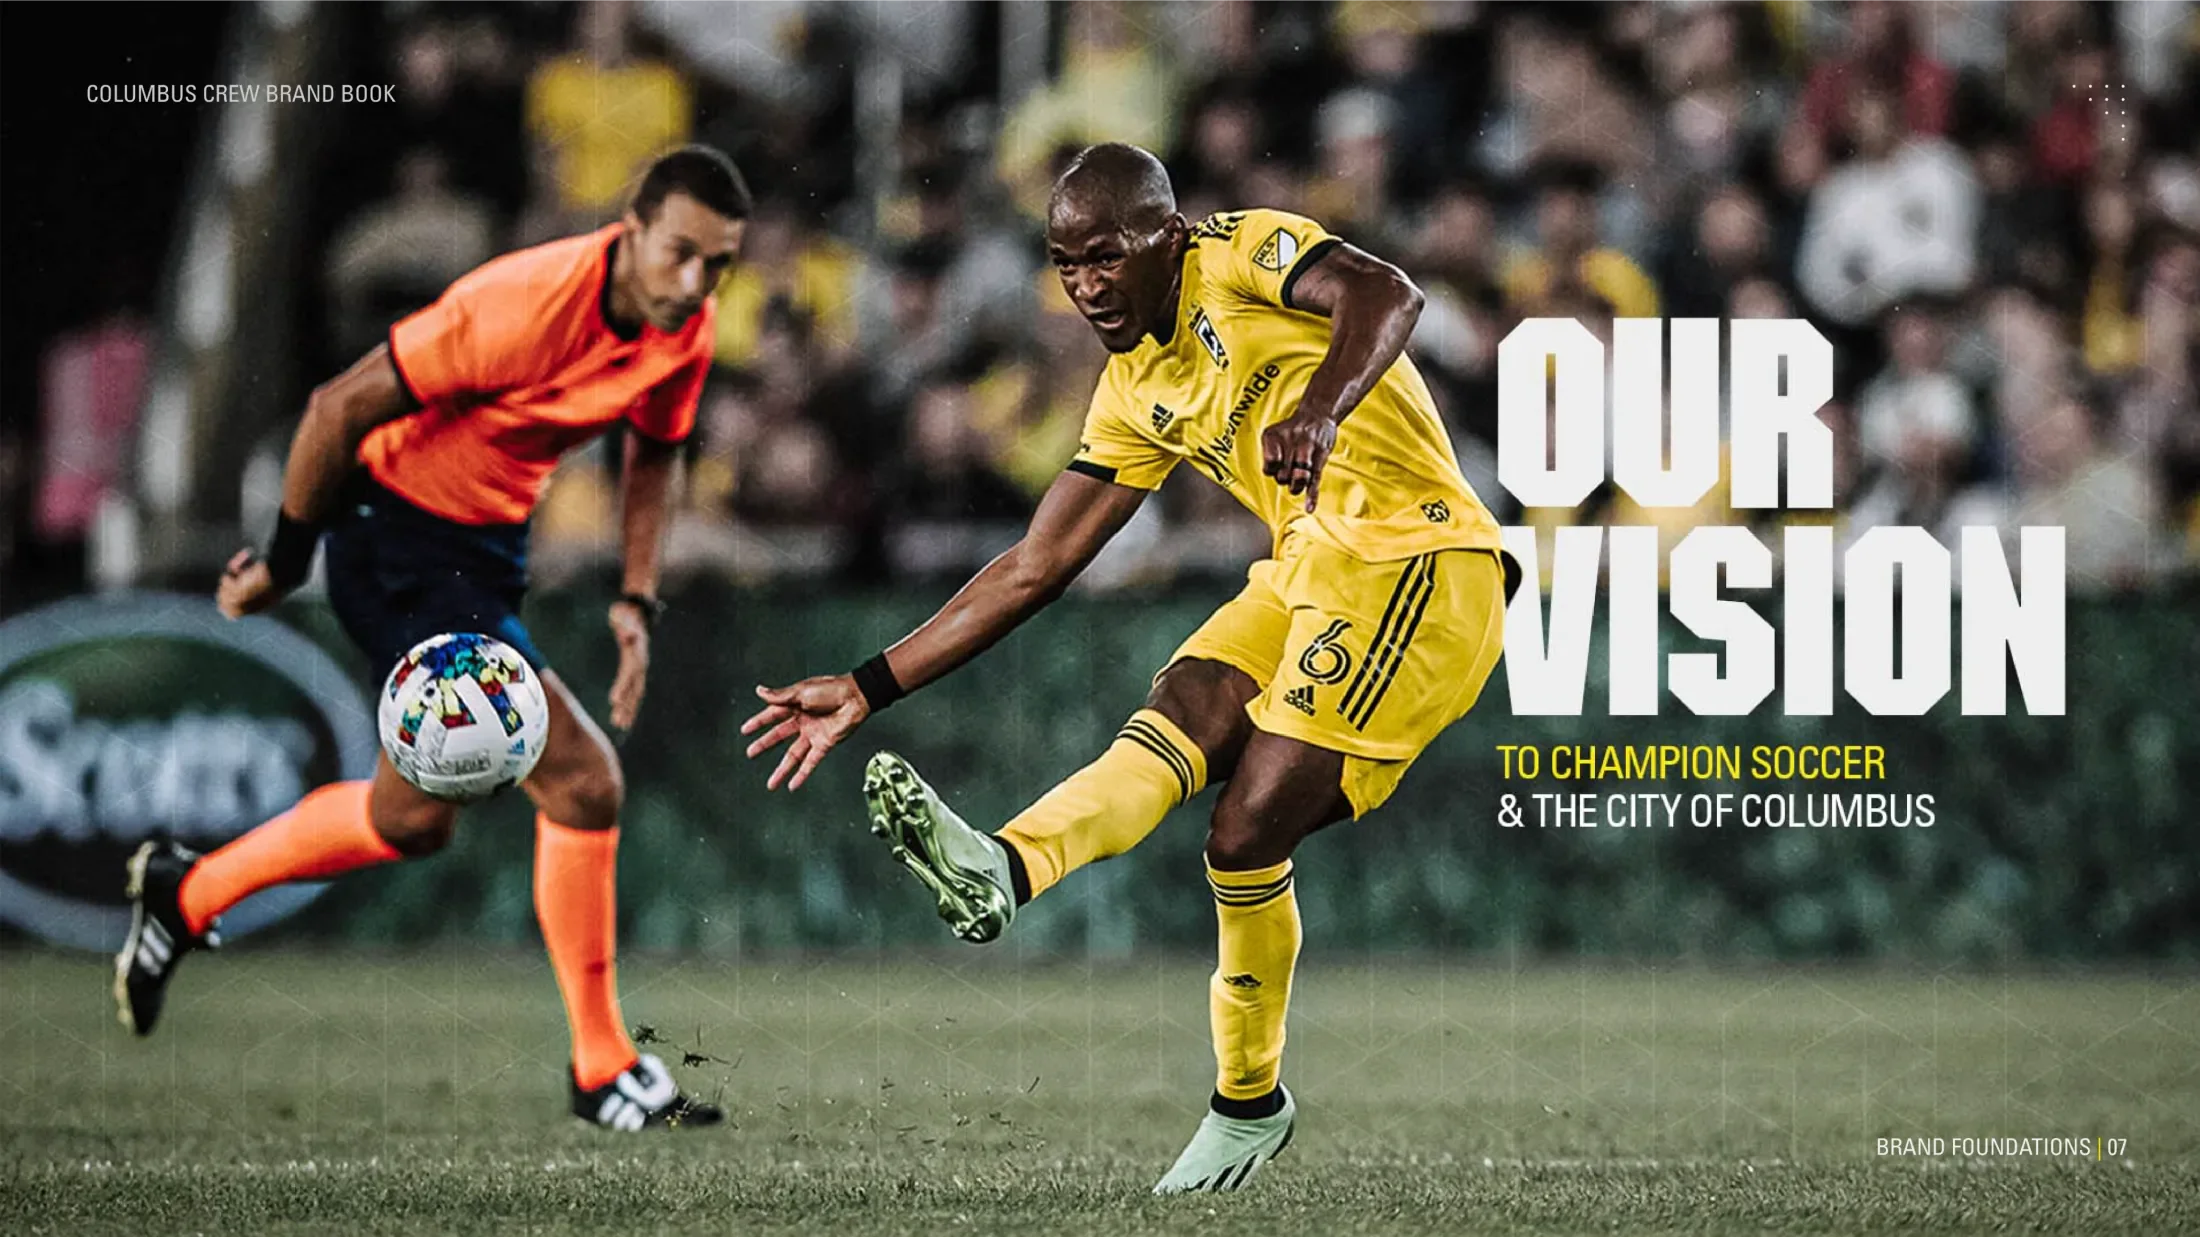 Our Vision page of the brand book featuring a Crew player kicking a ball near a referee